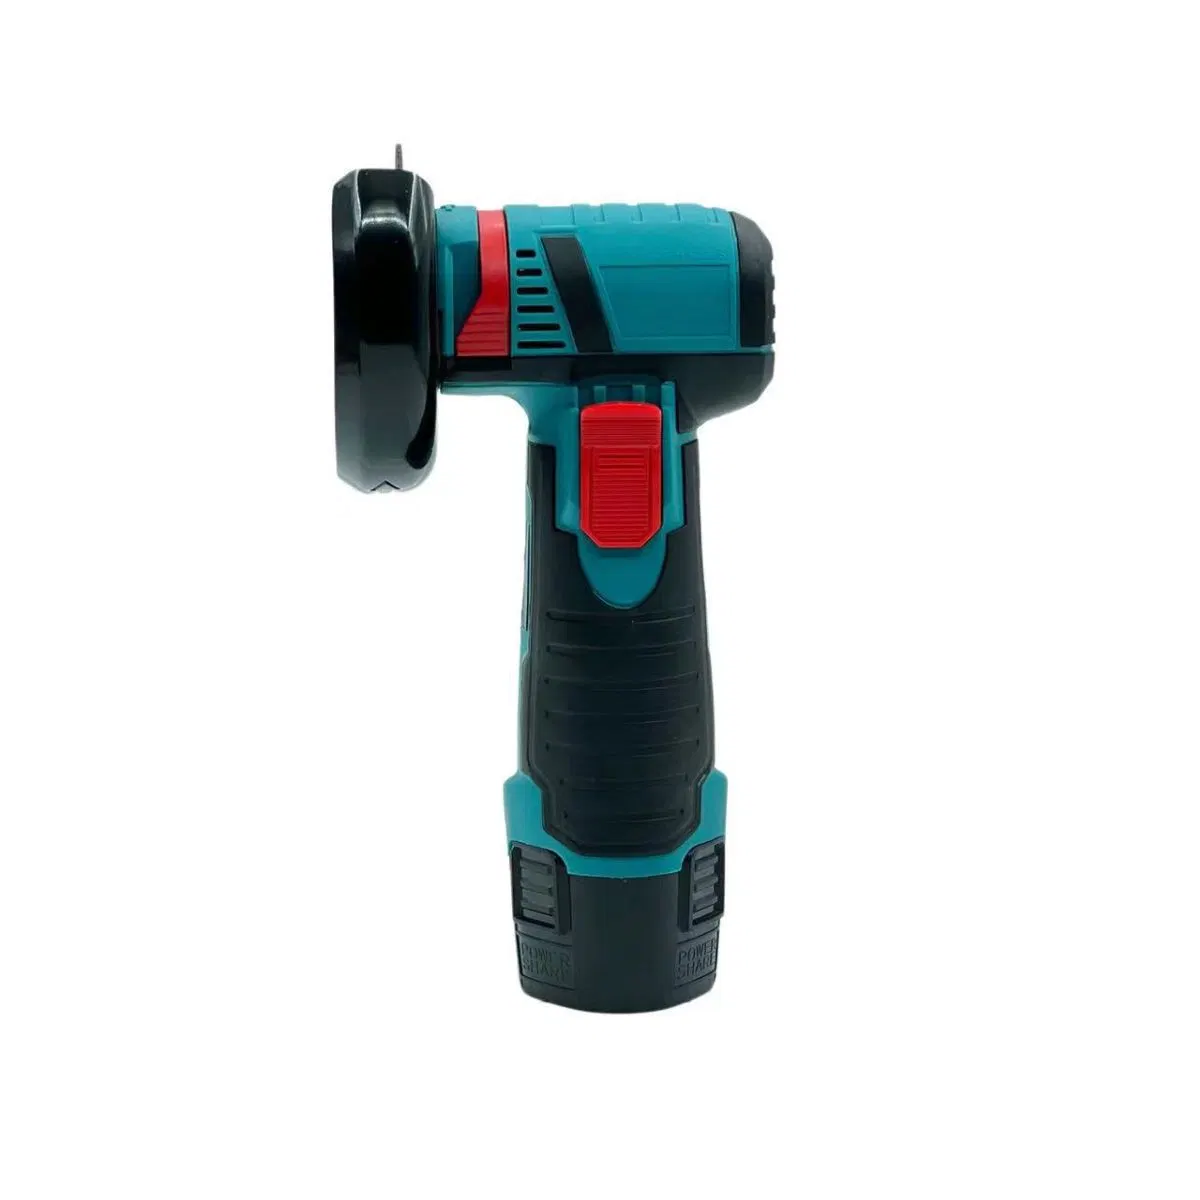 74mm Cordless Angle Grinder Power Tools for Cutting with Lithium Battery